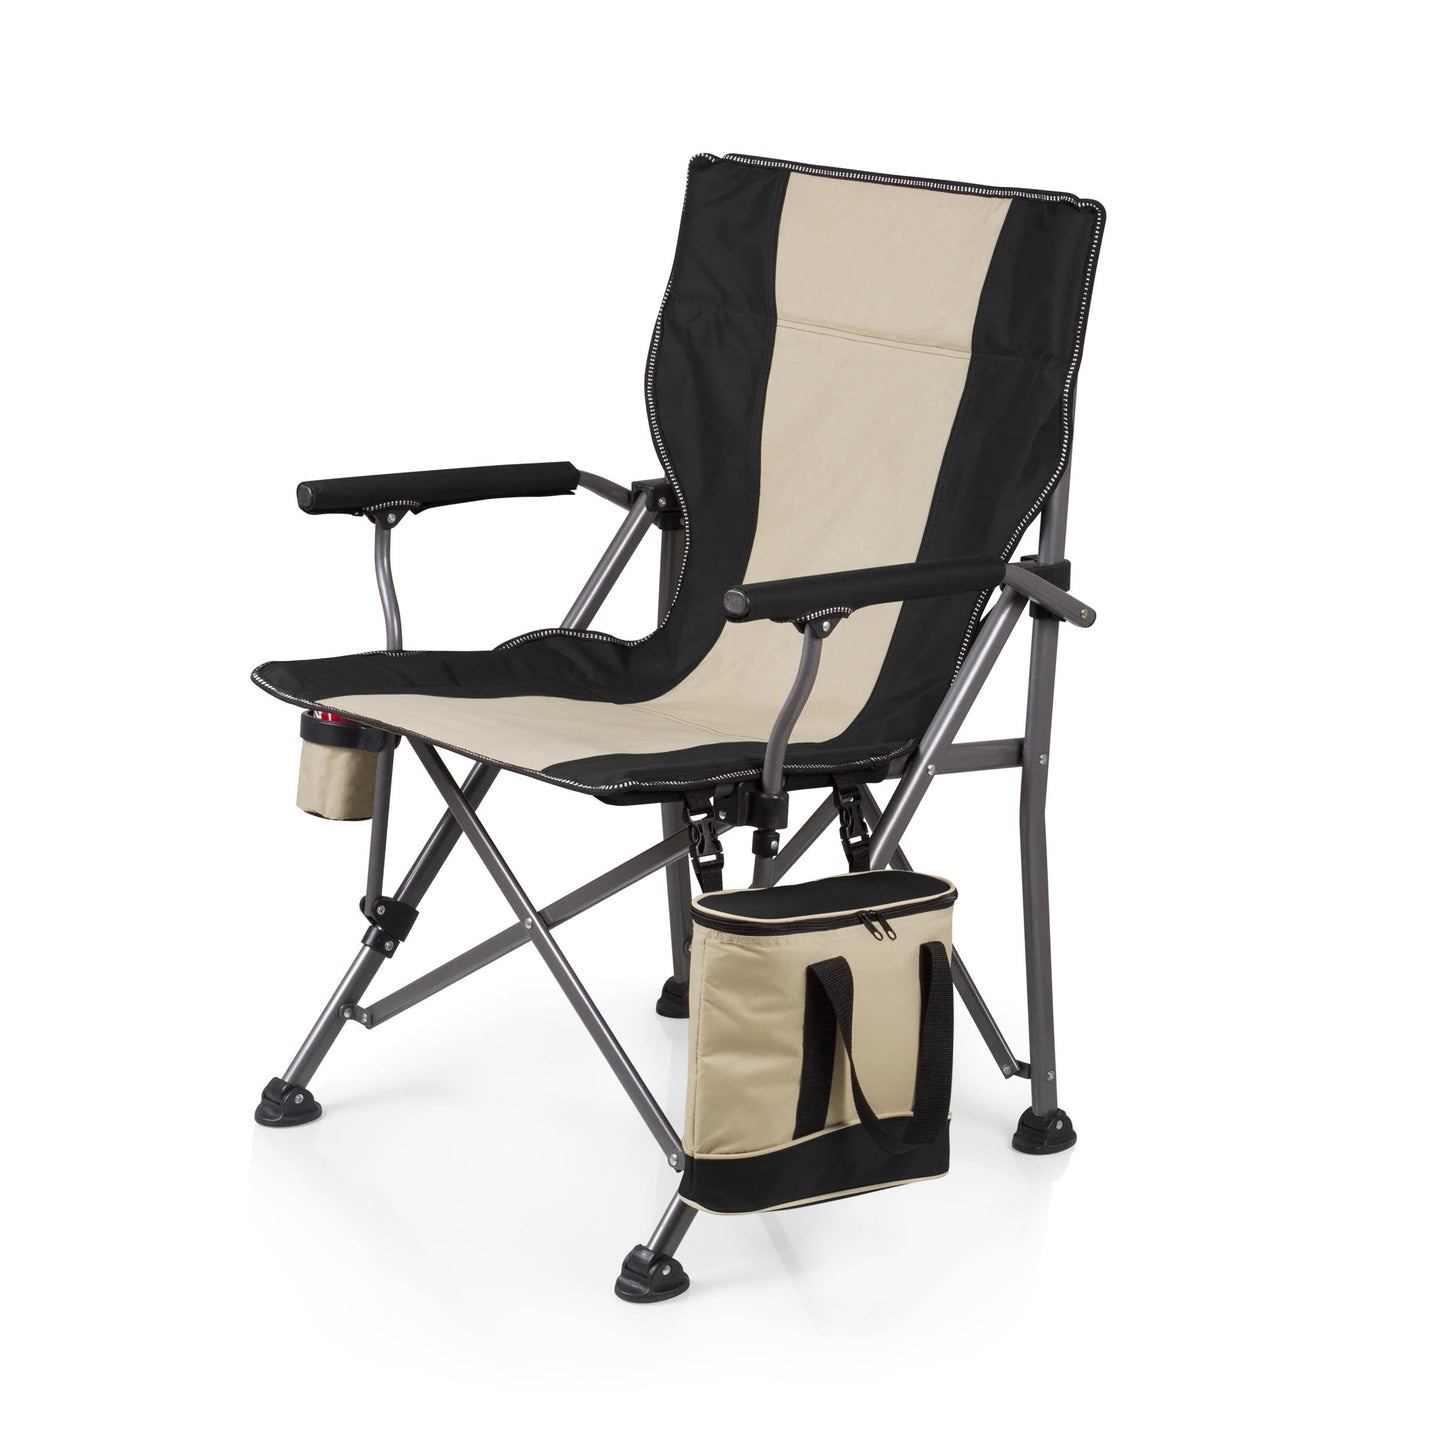 Los Angeles Rams - Outlander Folding Camping Chair with Cooler